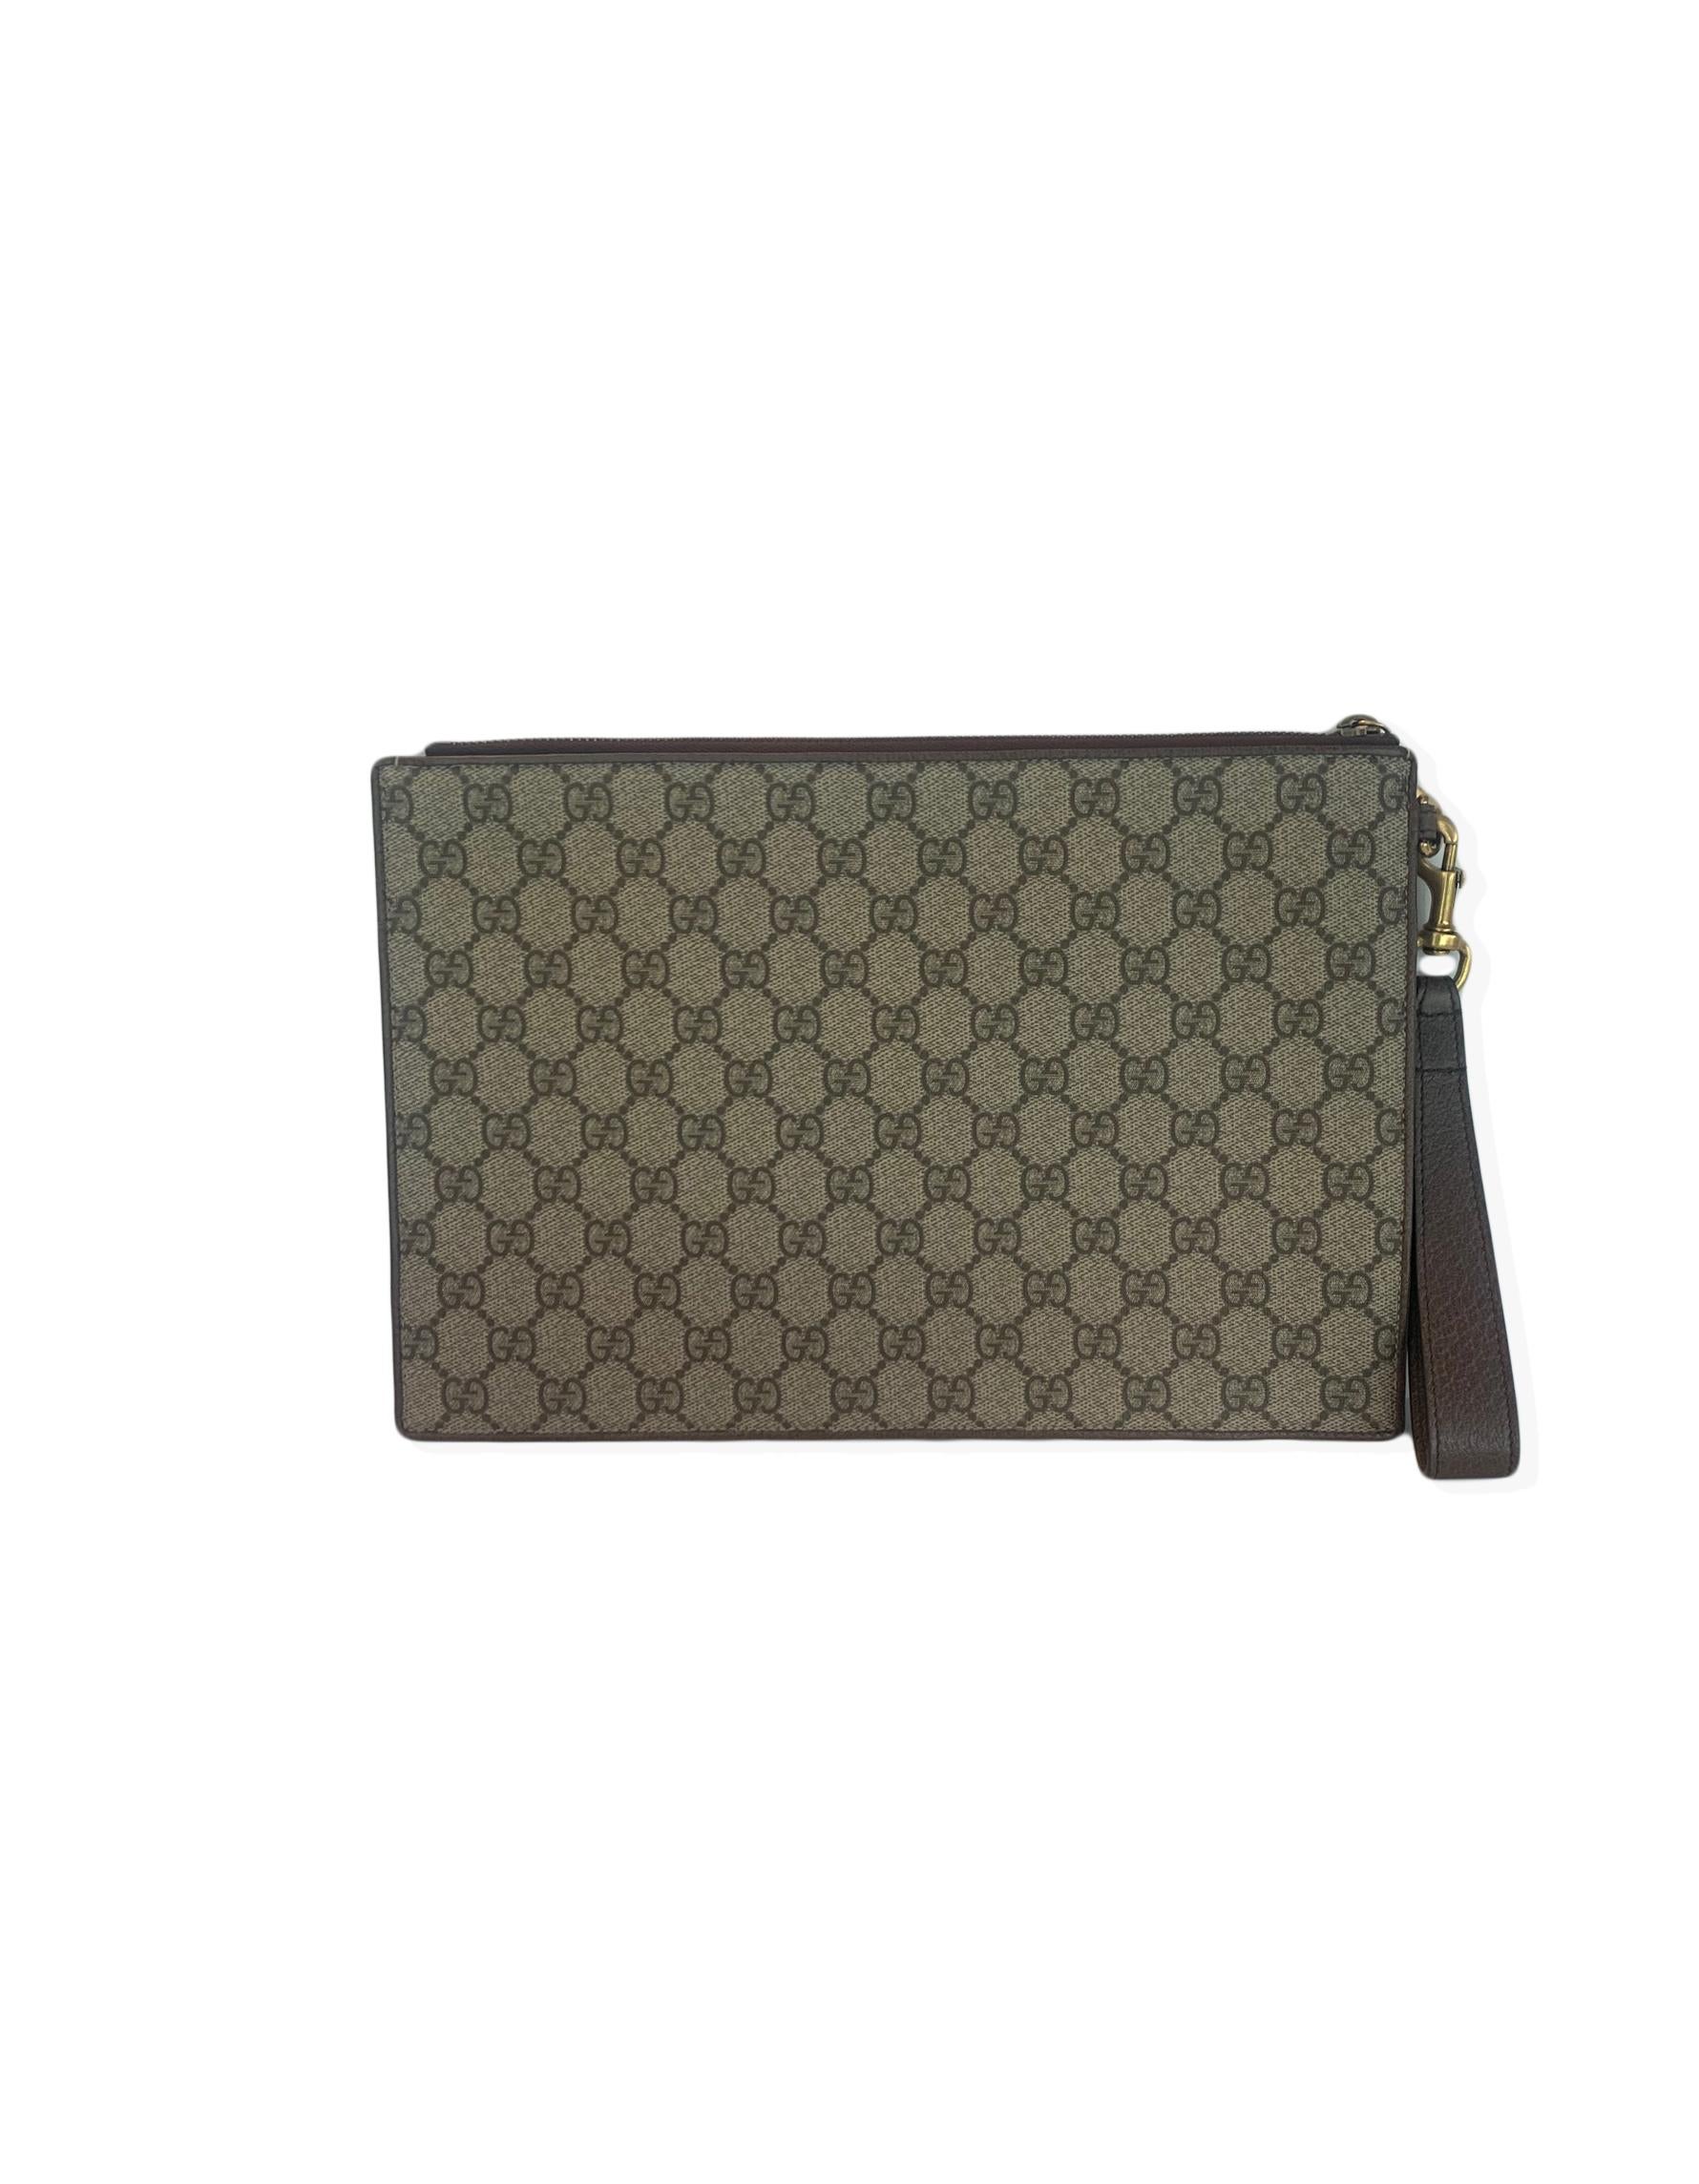 Black Gucci Florence GG Supreme Monogram Places Courrier Embroidered Pouch Wristlet